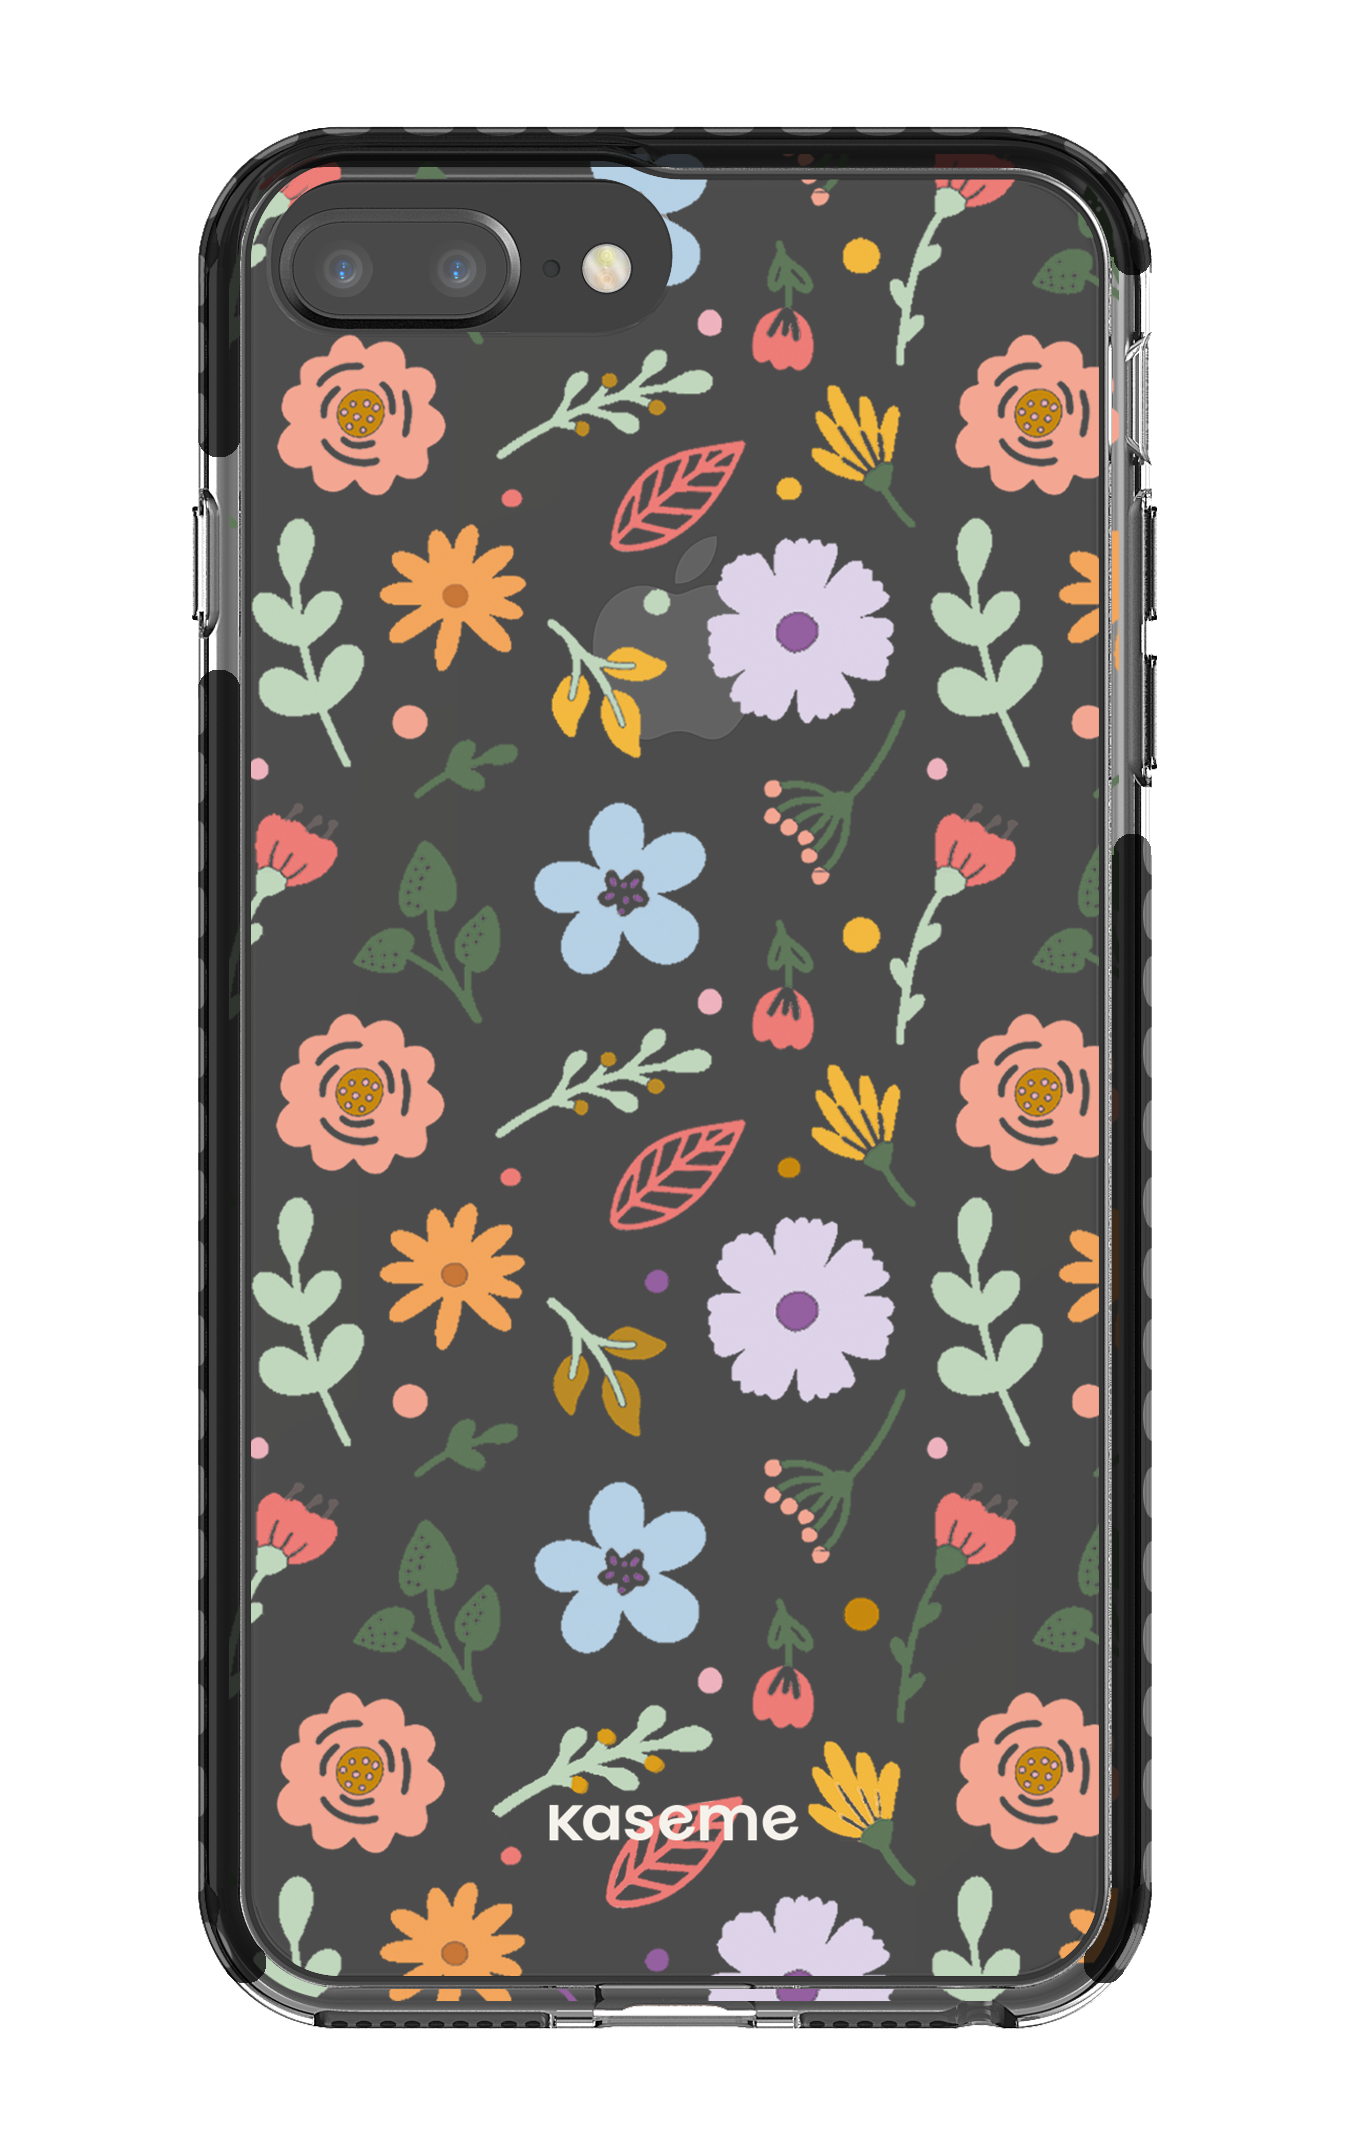 Charm clear case - iPhone 7/8 Plus